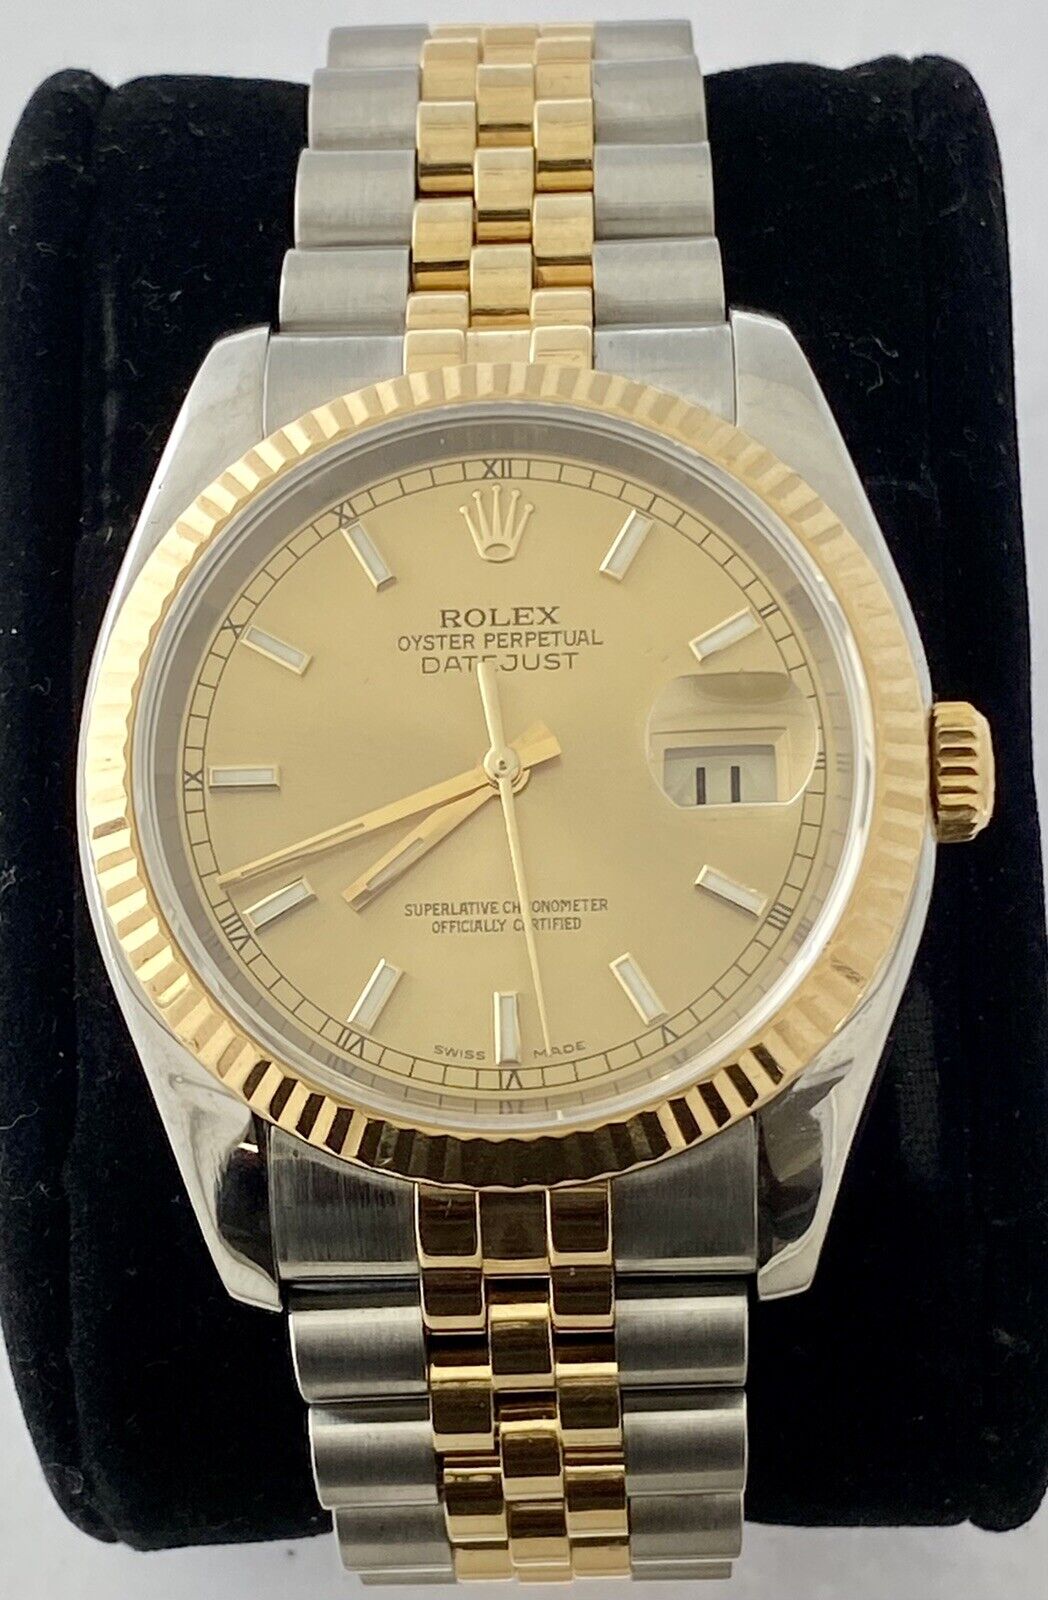 Rolex DateJust 116233 2 Tone Watch Gold Dial Automatic Watch